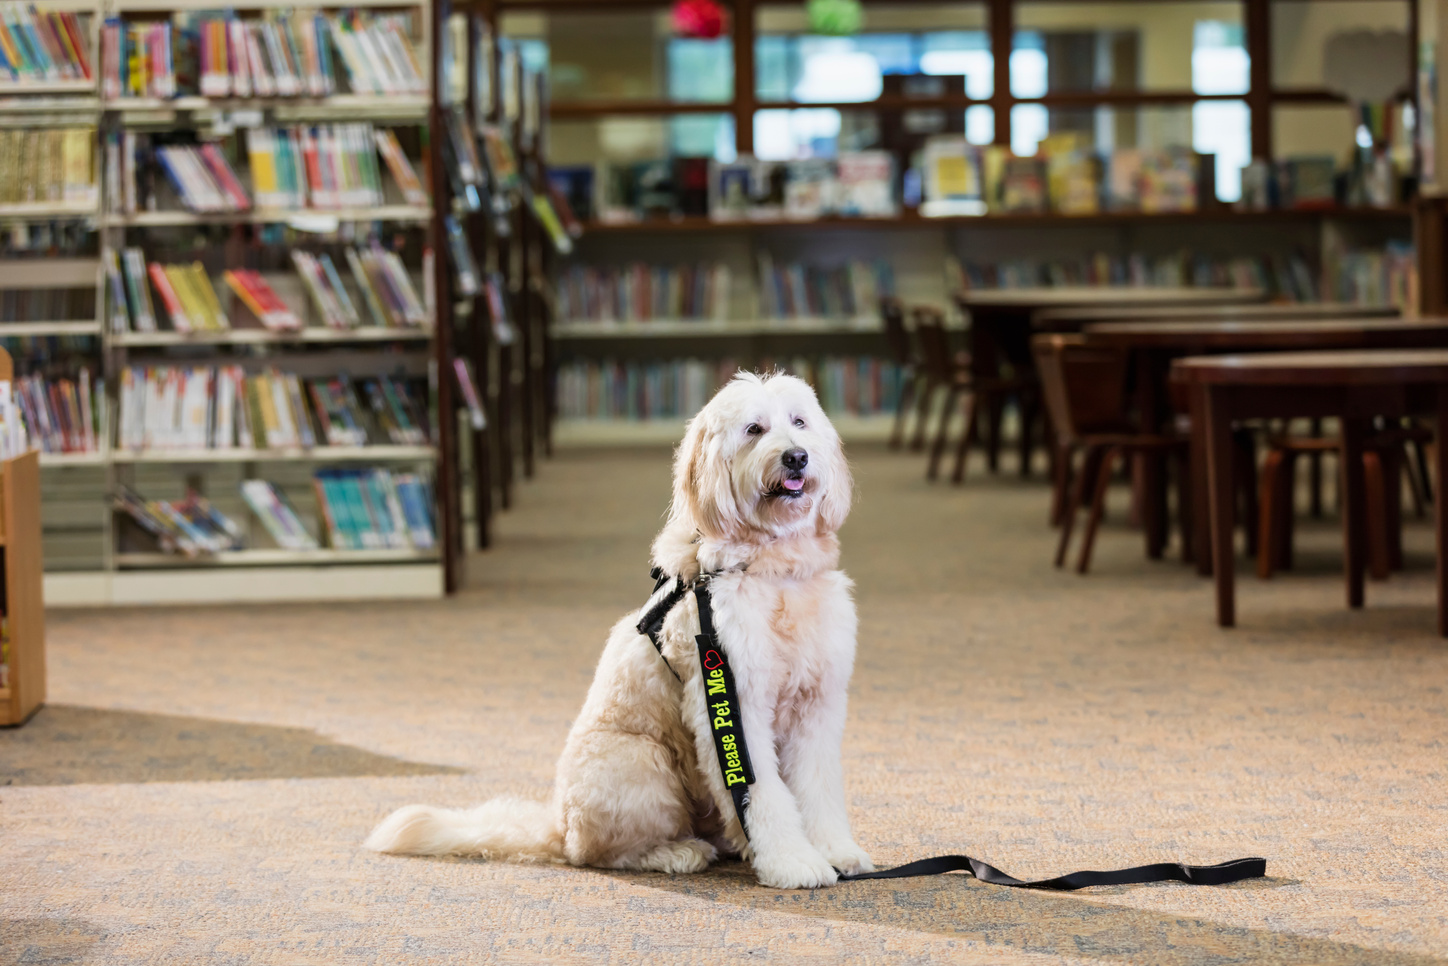 Therapy dog sitting in public library